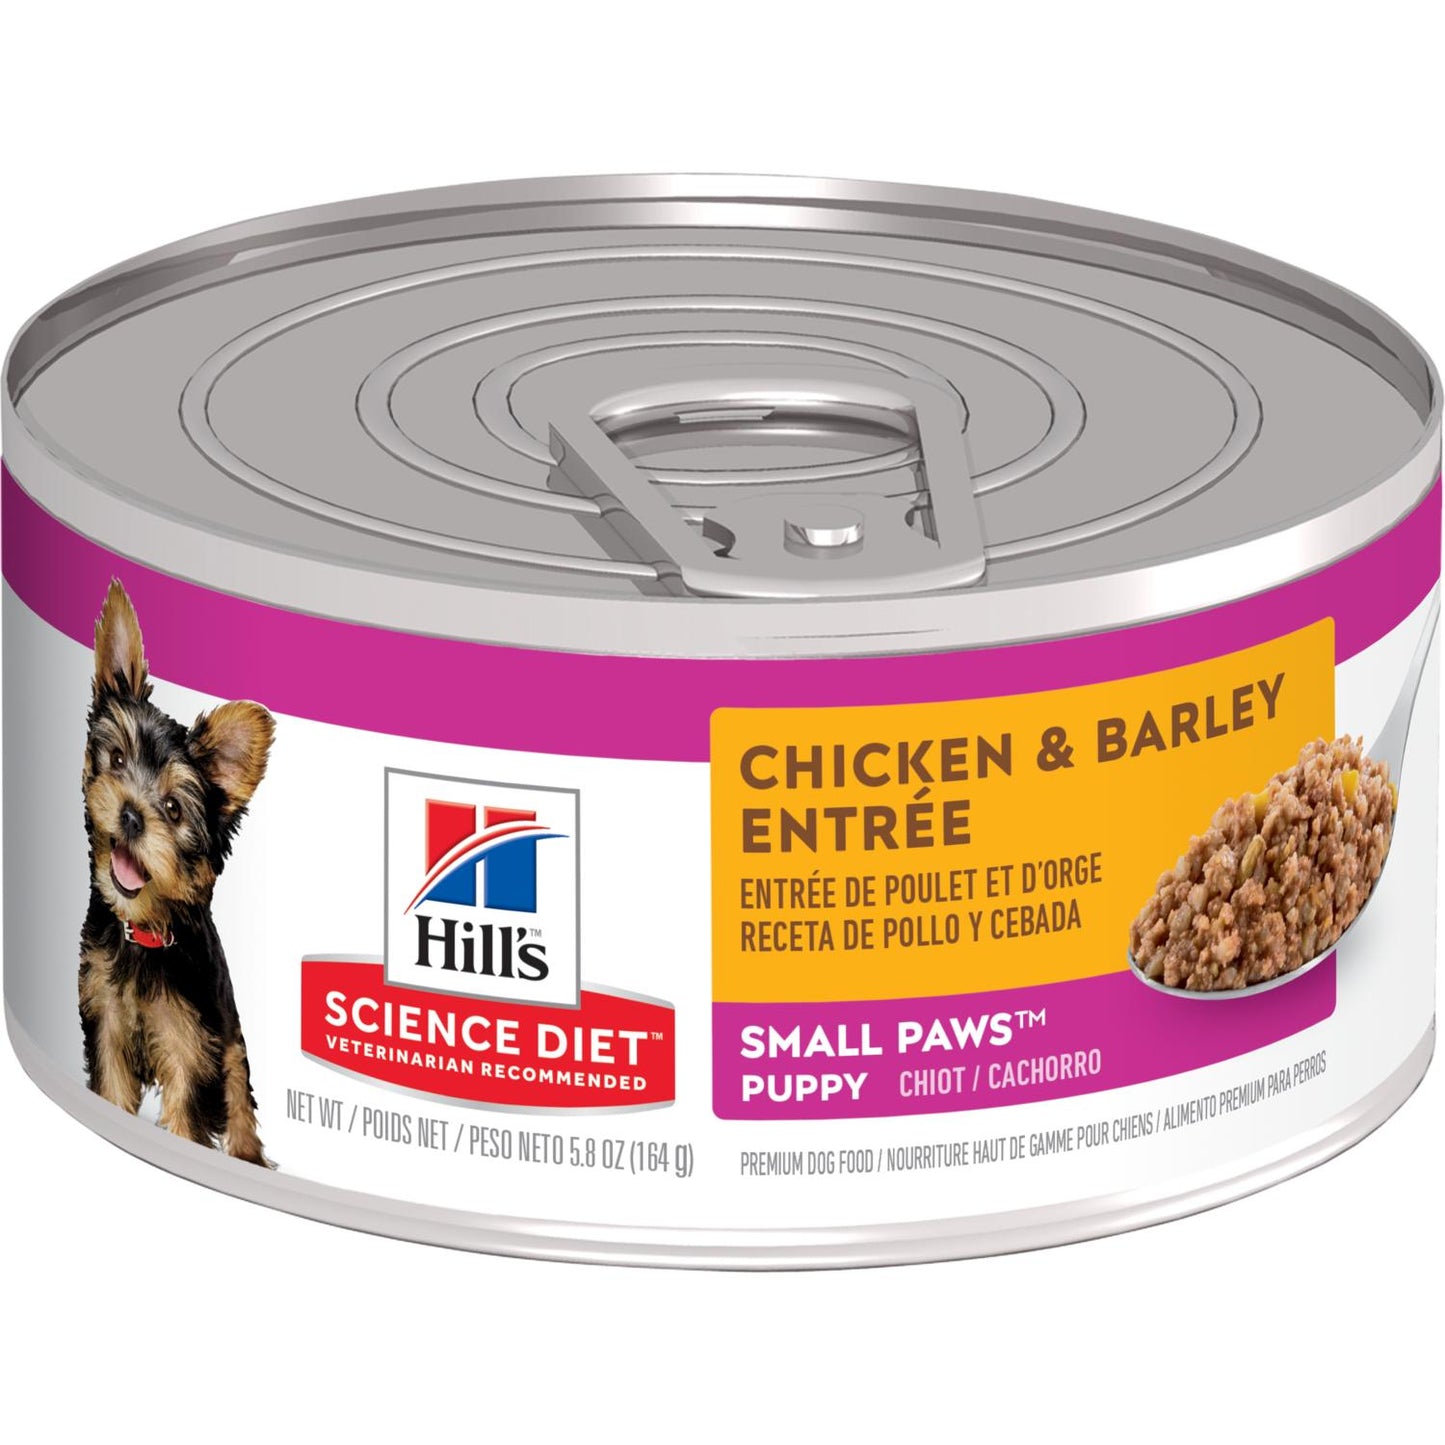 Hill's Science Diet Puppy Small Paws Chicken & Barley Entrée